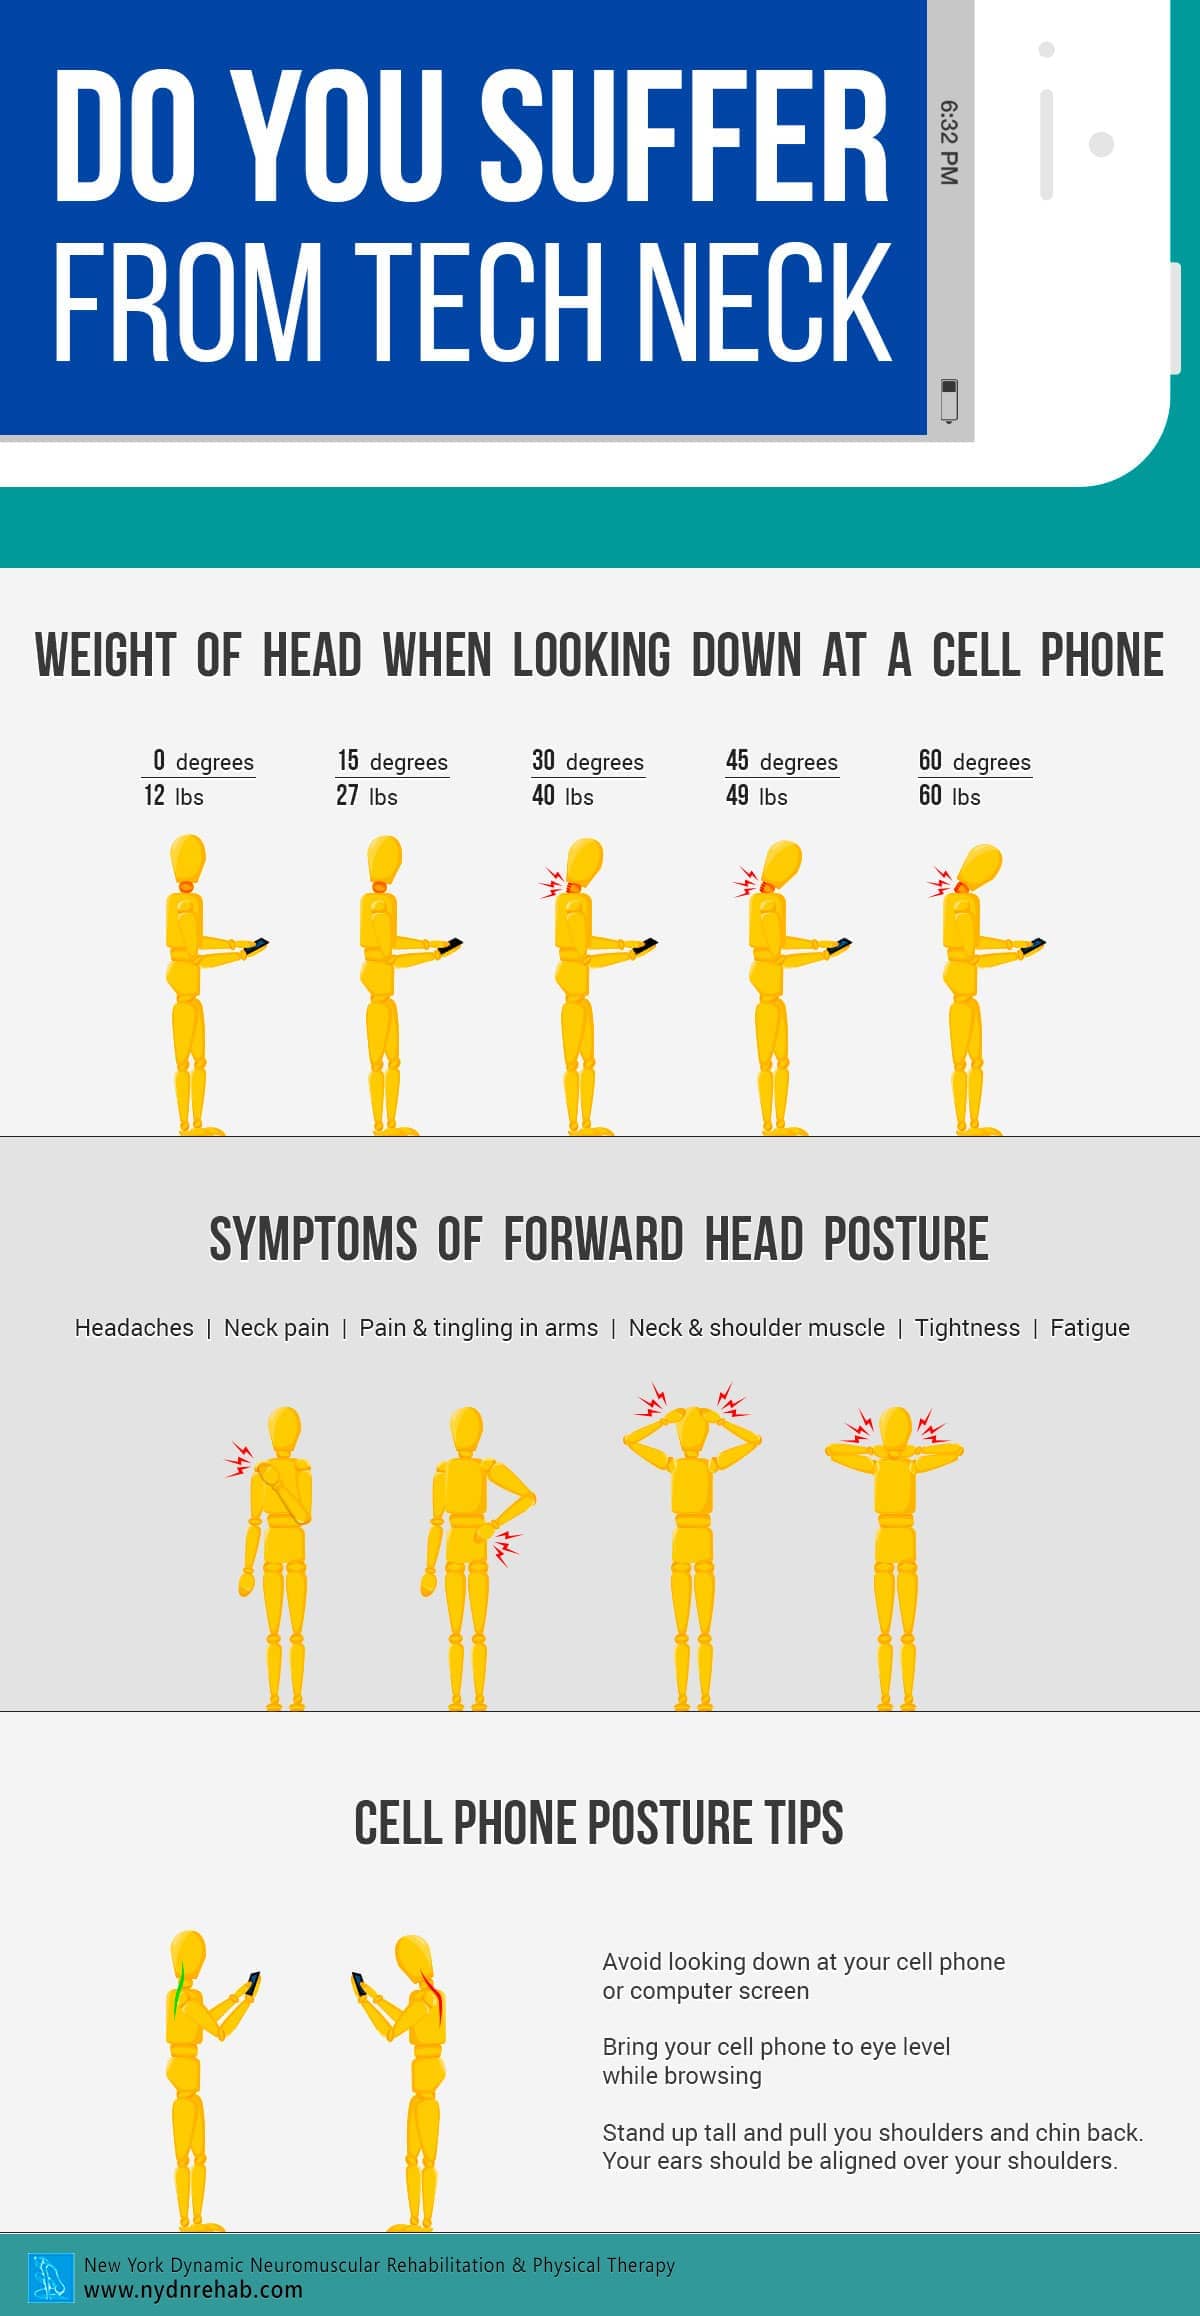 Do You Suffer from Tech Neck?